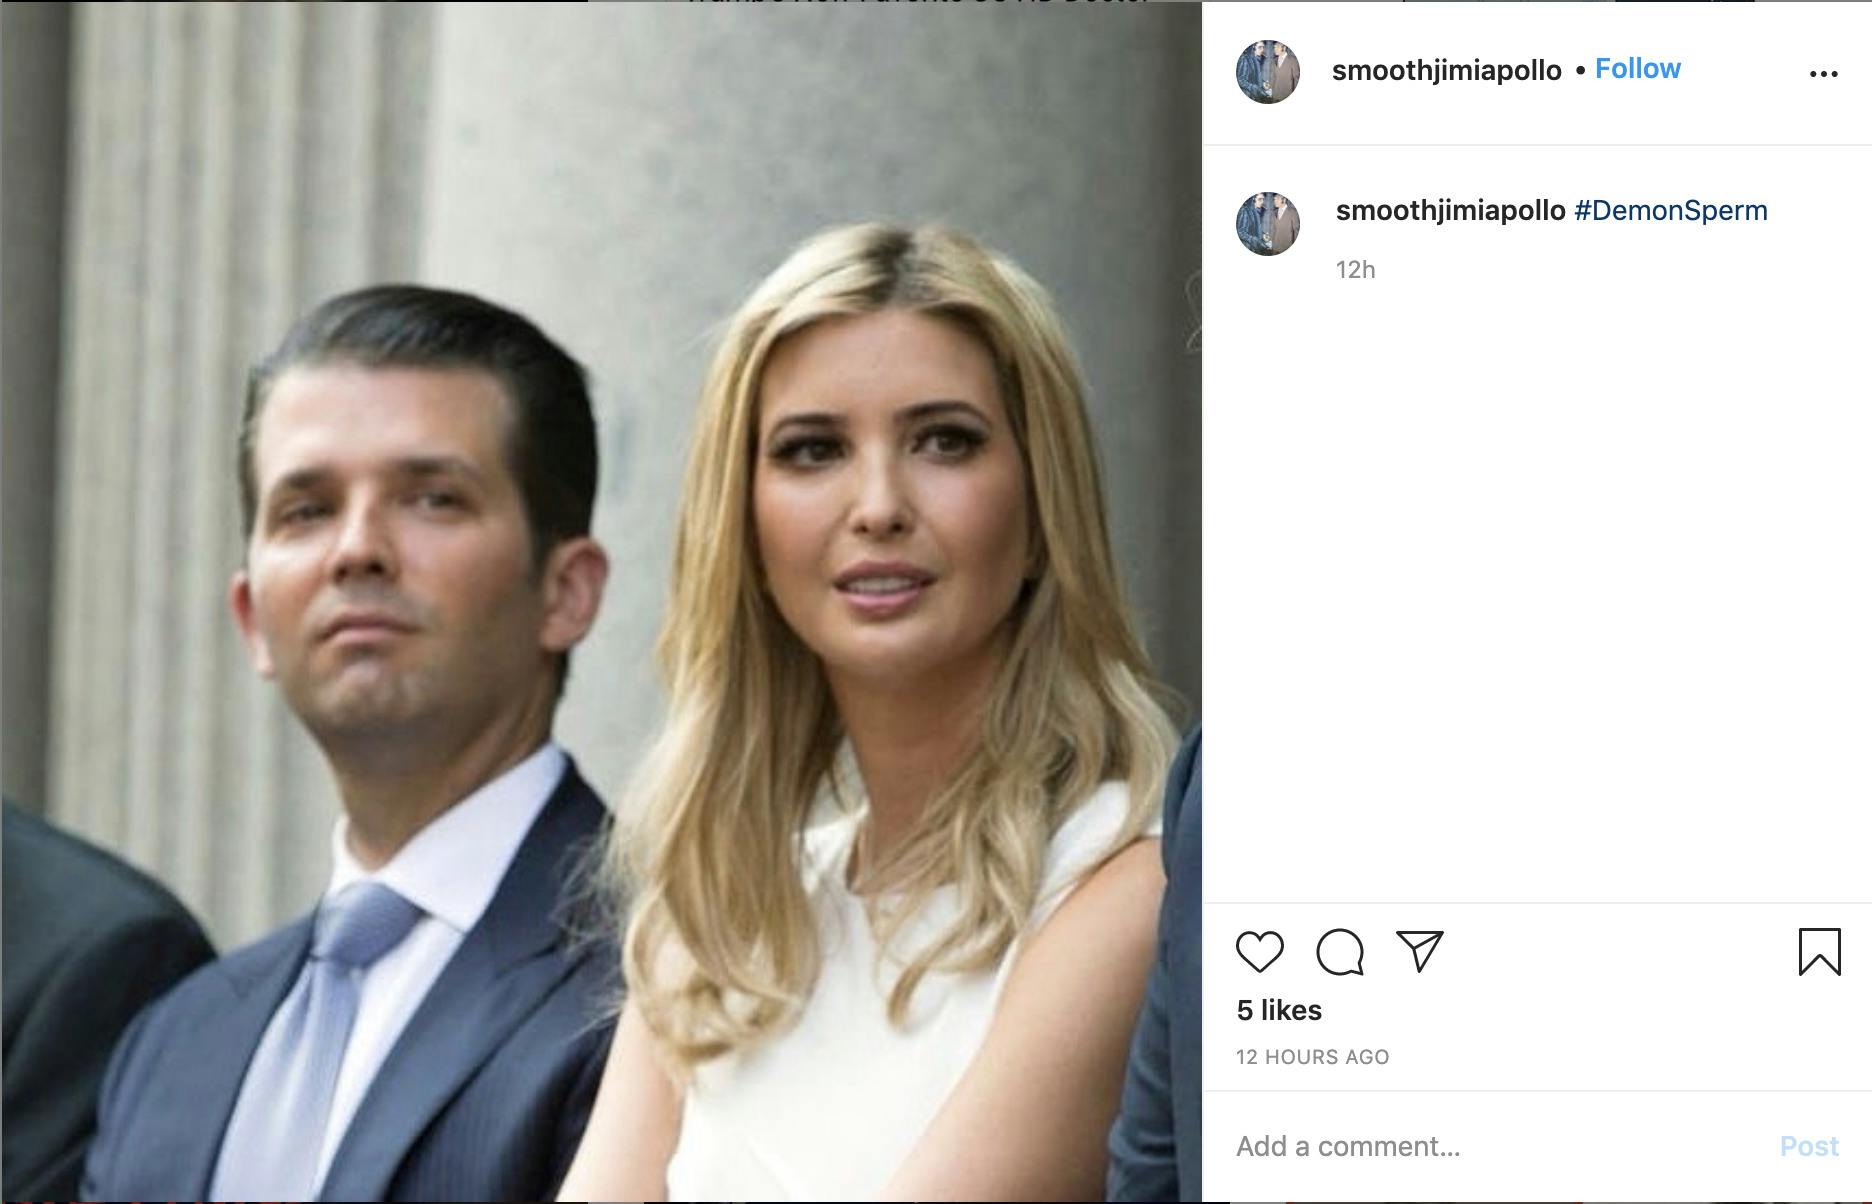 Image of Ivanka and Don Jr with caption #DemonSperm